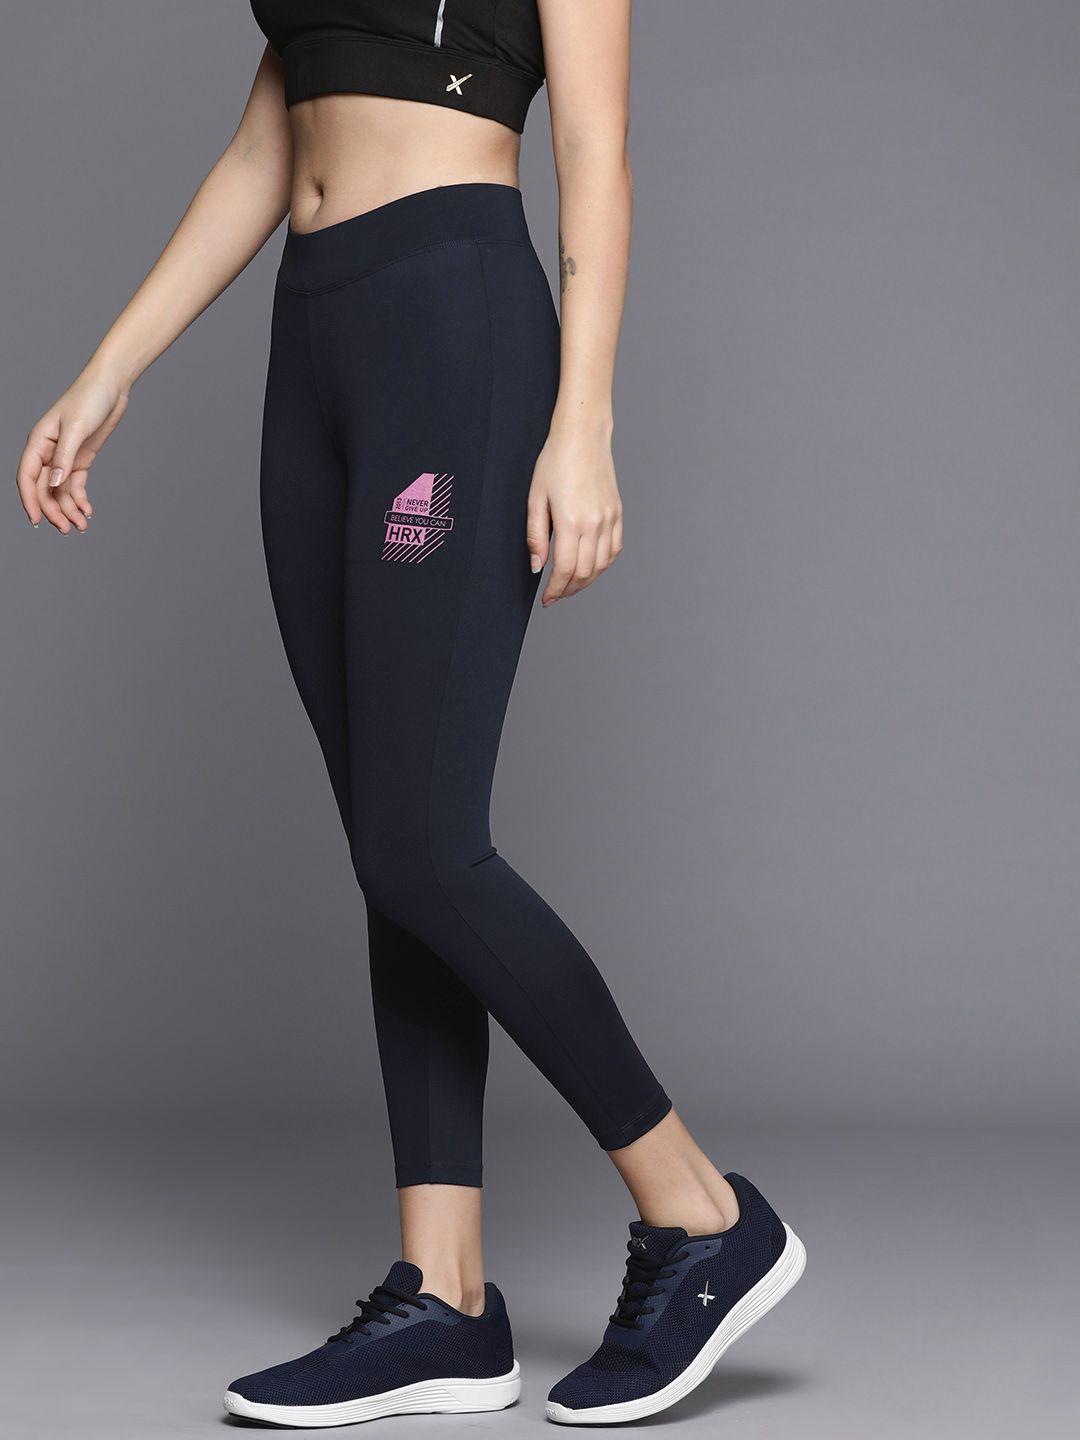 hrx by hrithik roshan cropped running tights